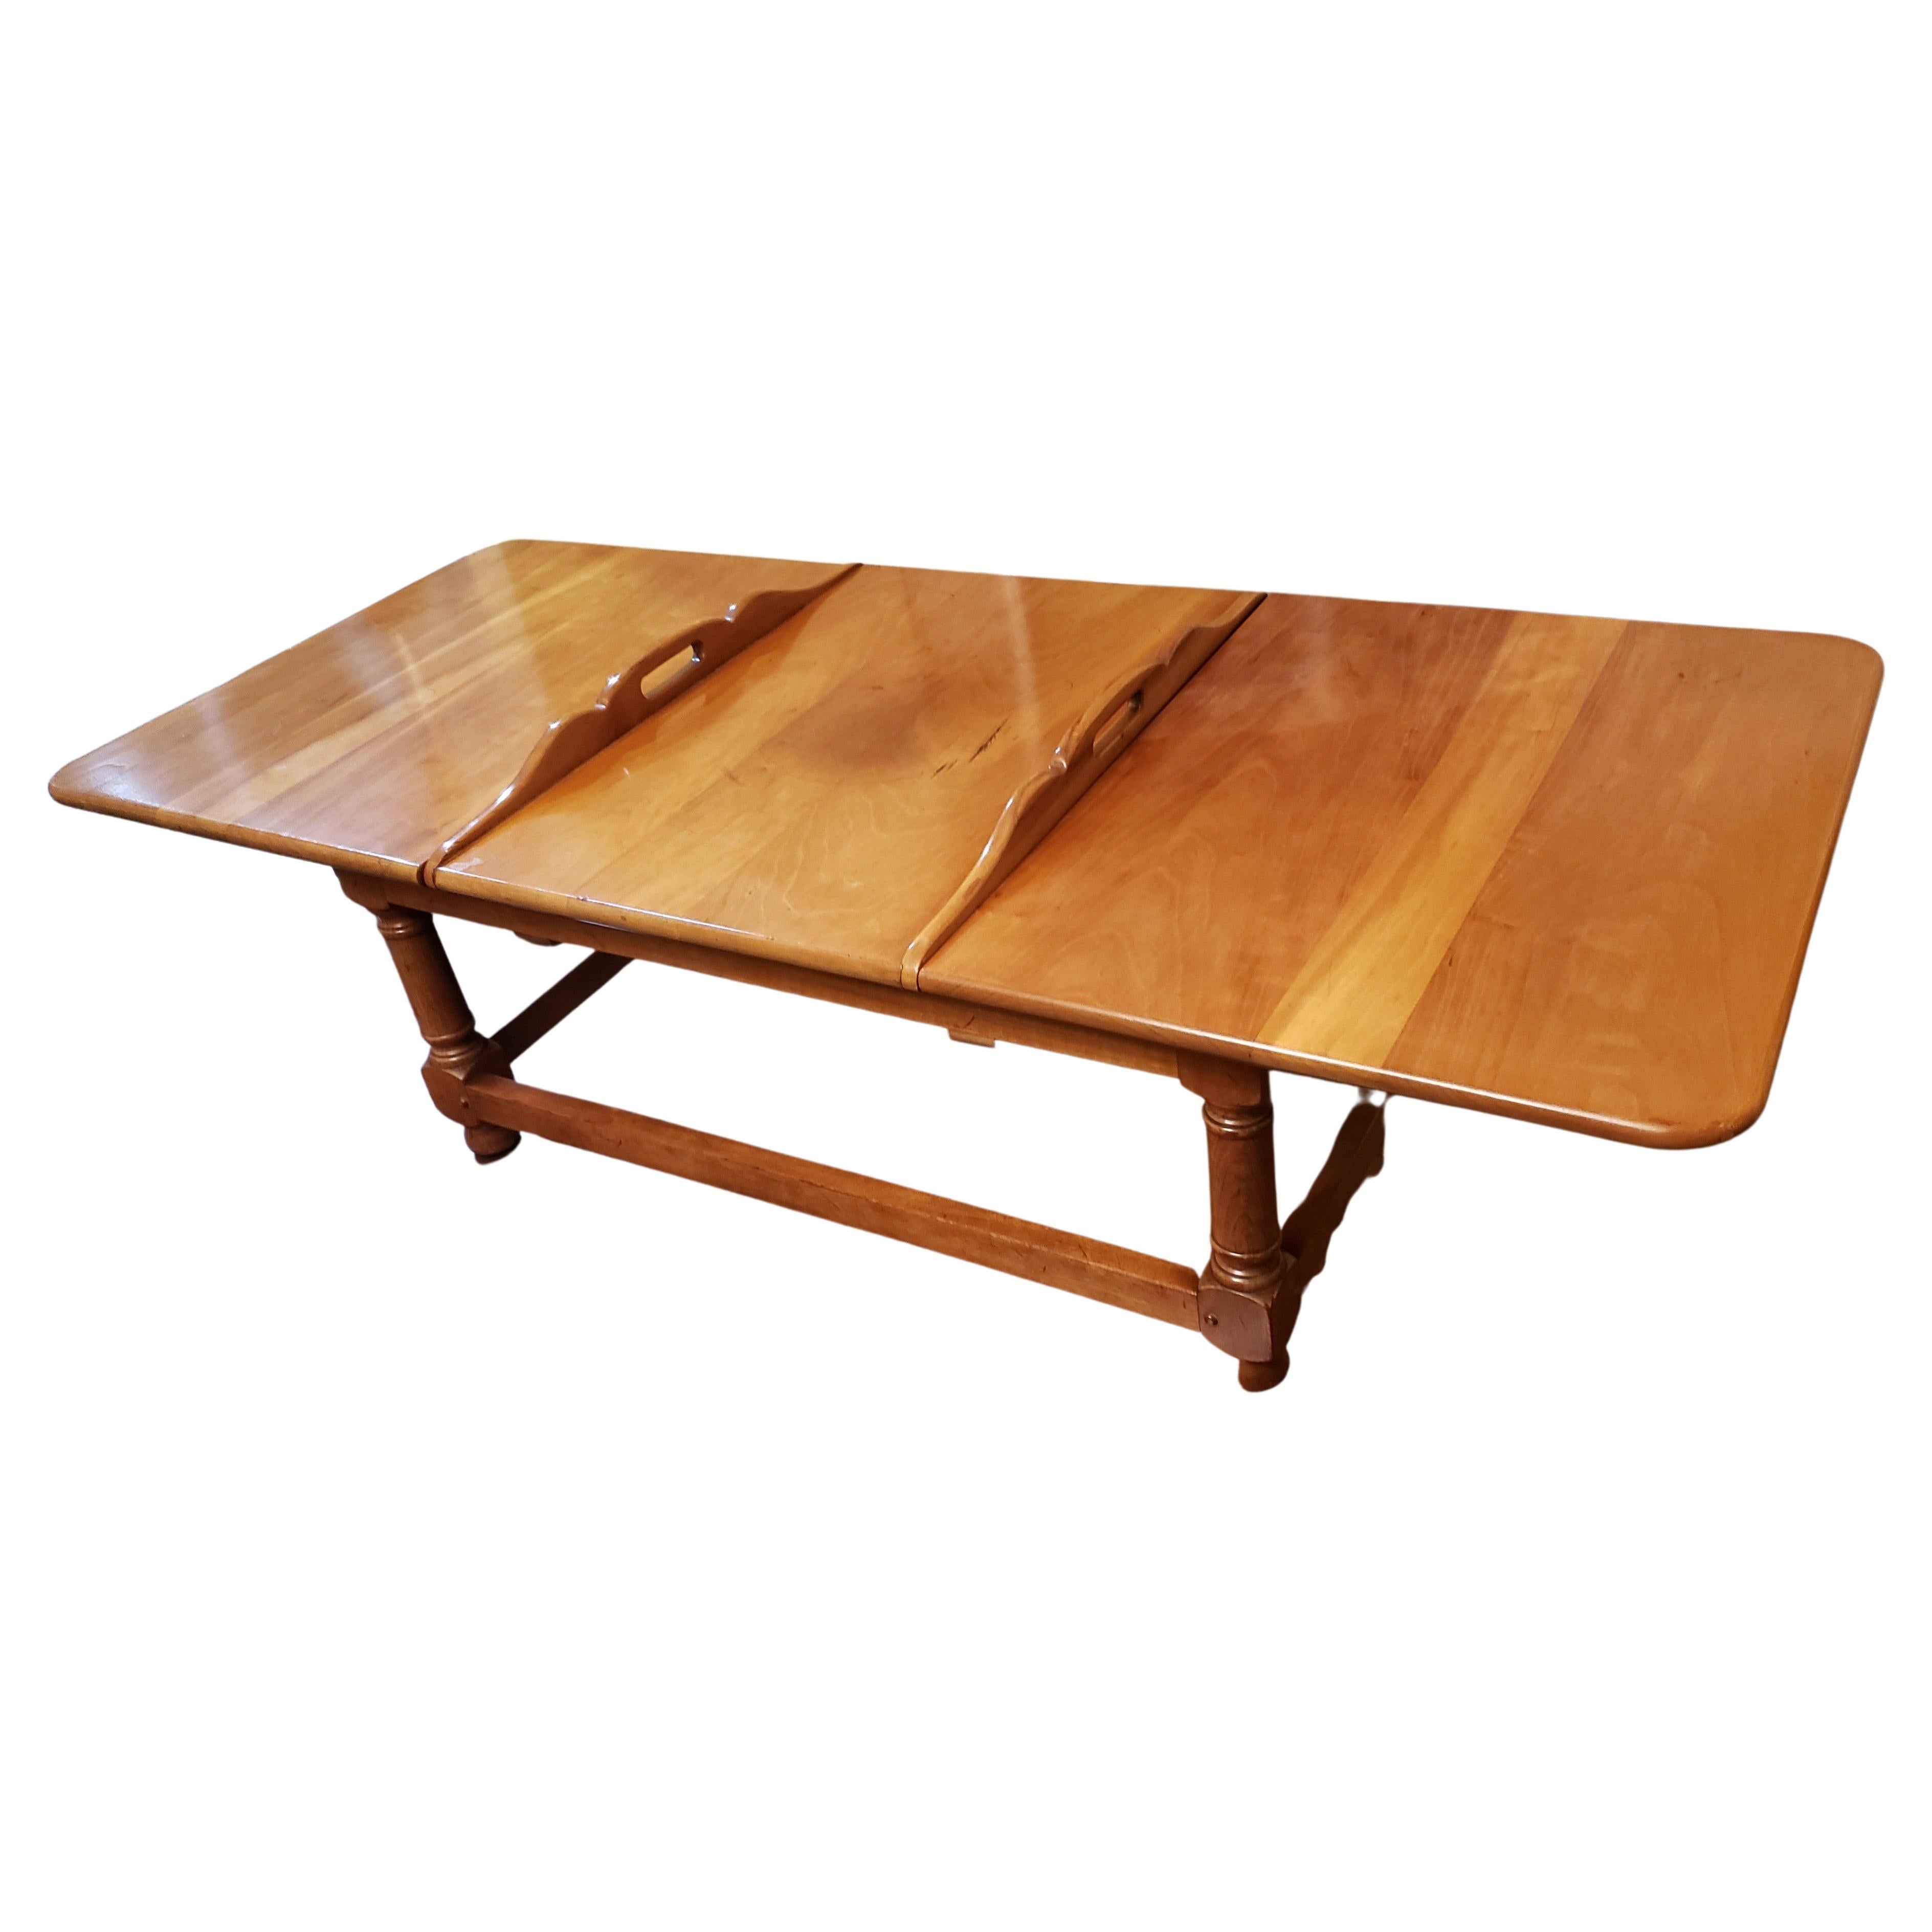 Mid-Century Modern Stickley Solid Maple Extending Coffee Tray Table, Circa 1950s